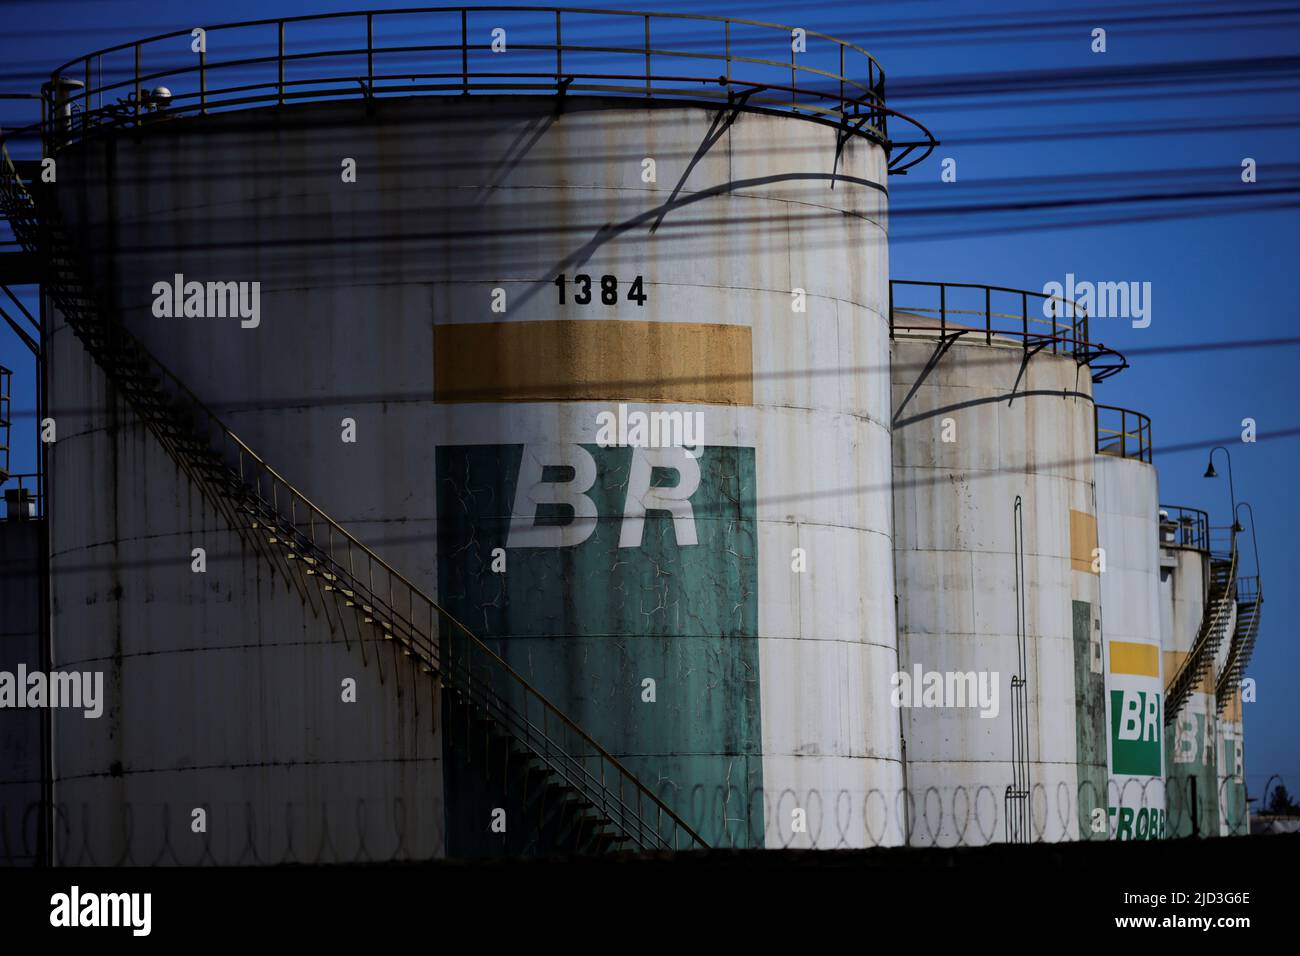 A general view of the tanks of Brazil's state-run Petrobras oil company following the announcement of updated fuel prices at at the Brazilian oil company Petrobras in Brasilia, Brazil June 17, 2022. REUTERS/Ueslei Marcelino Stock Photo